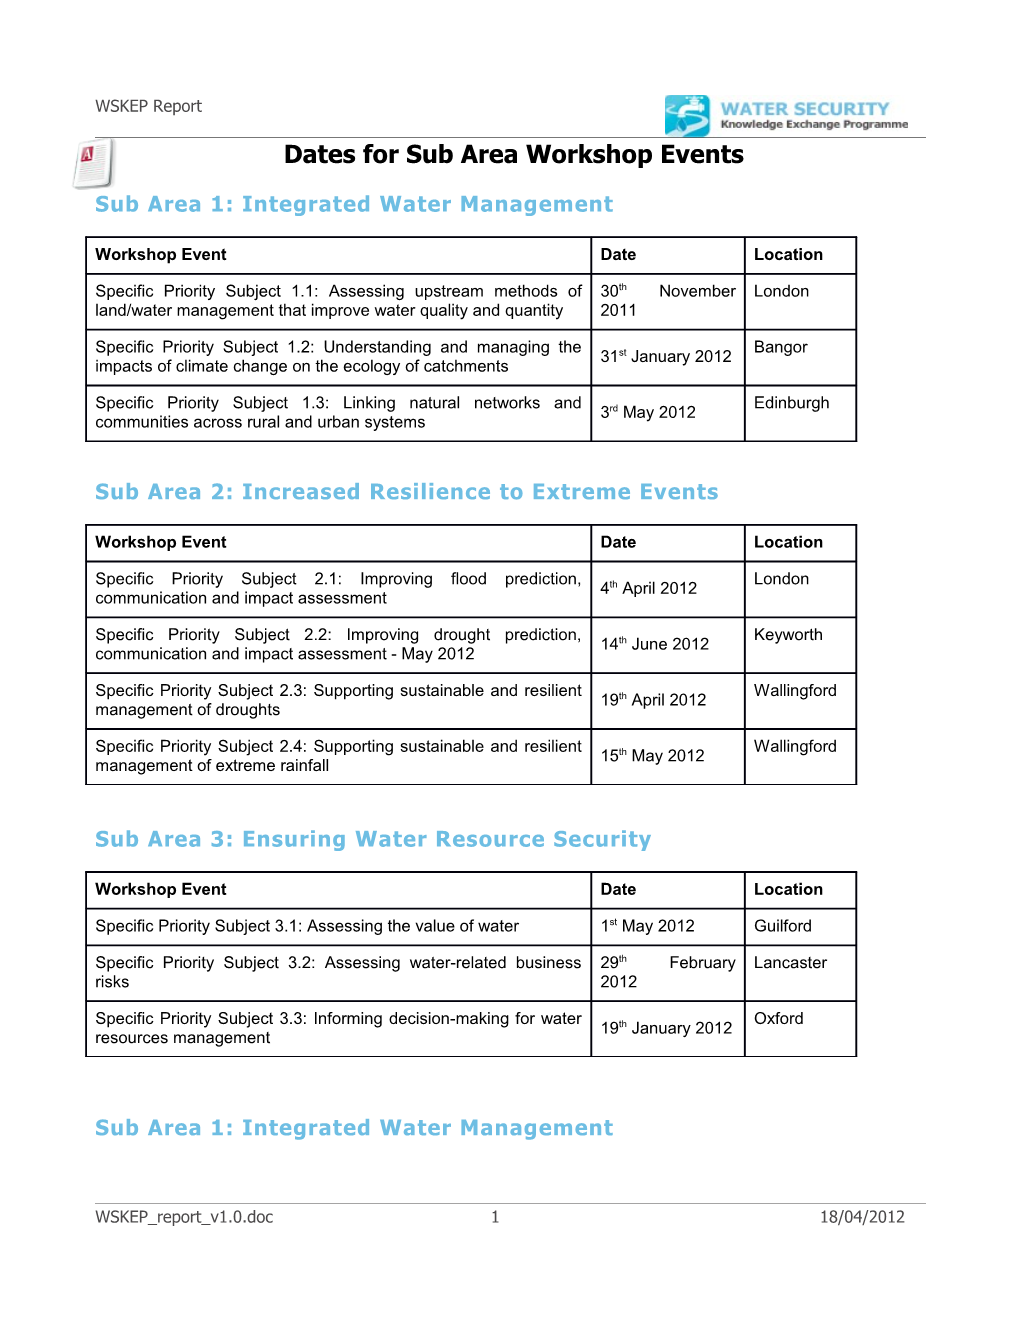 Sub Area 1: Integrated Water Management